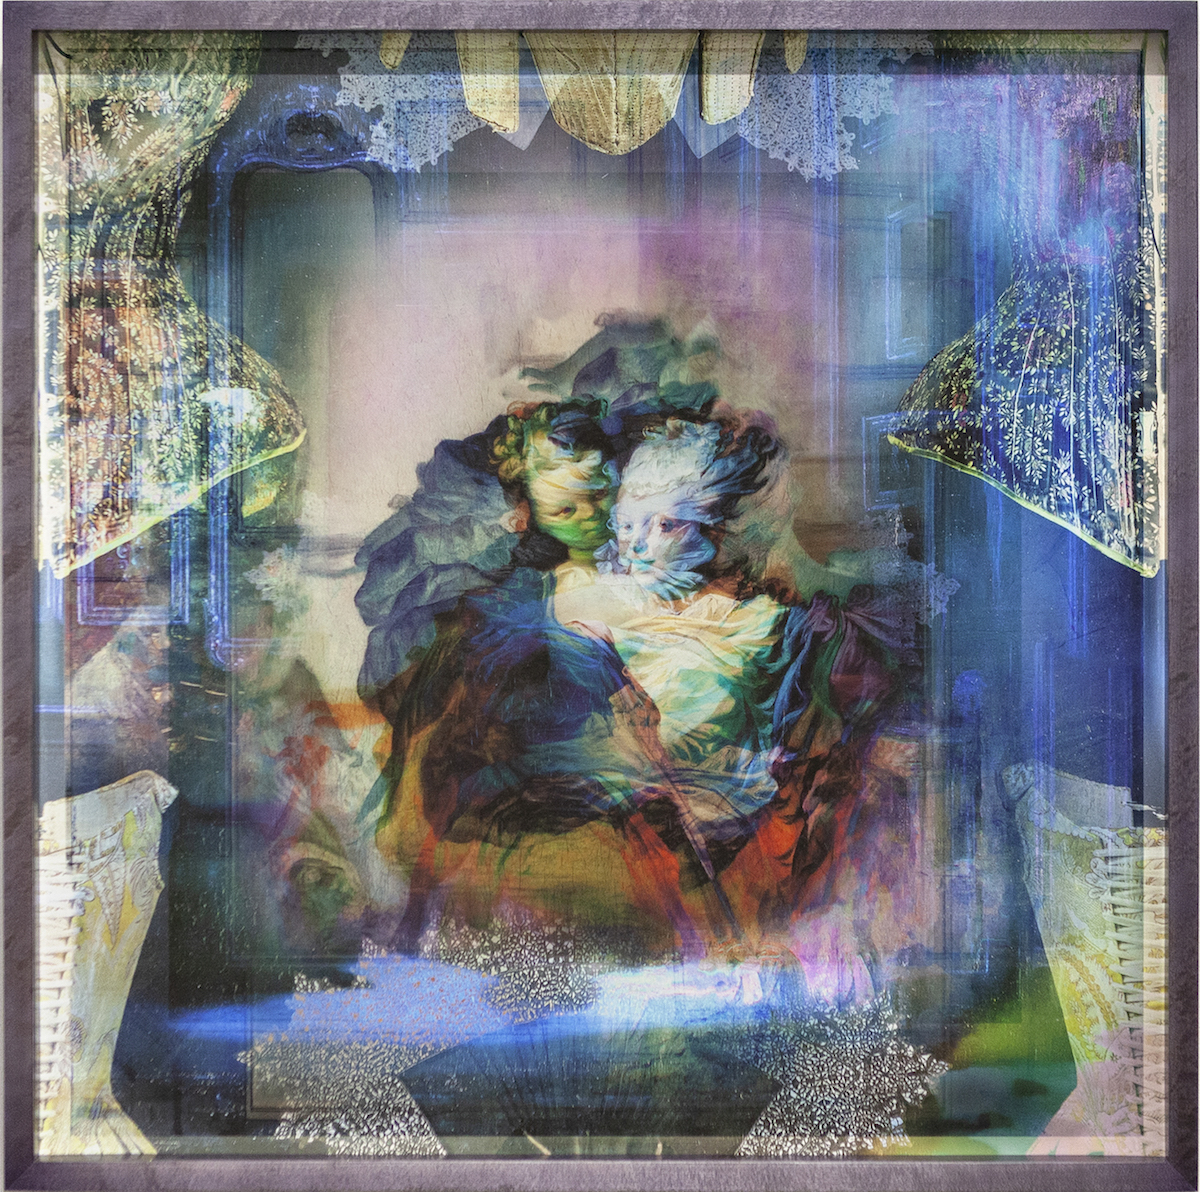 David Molander, Systrarna, 2019, pigment print, museum glass, wooden frame, 78 x 78 cm, edition of 5